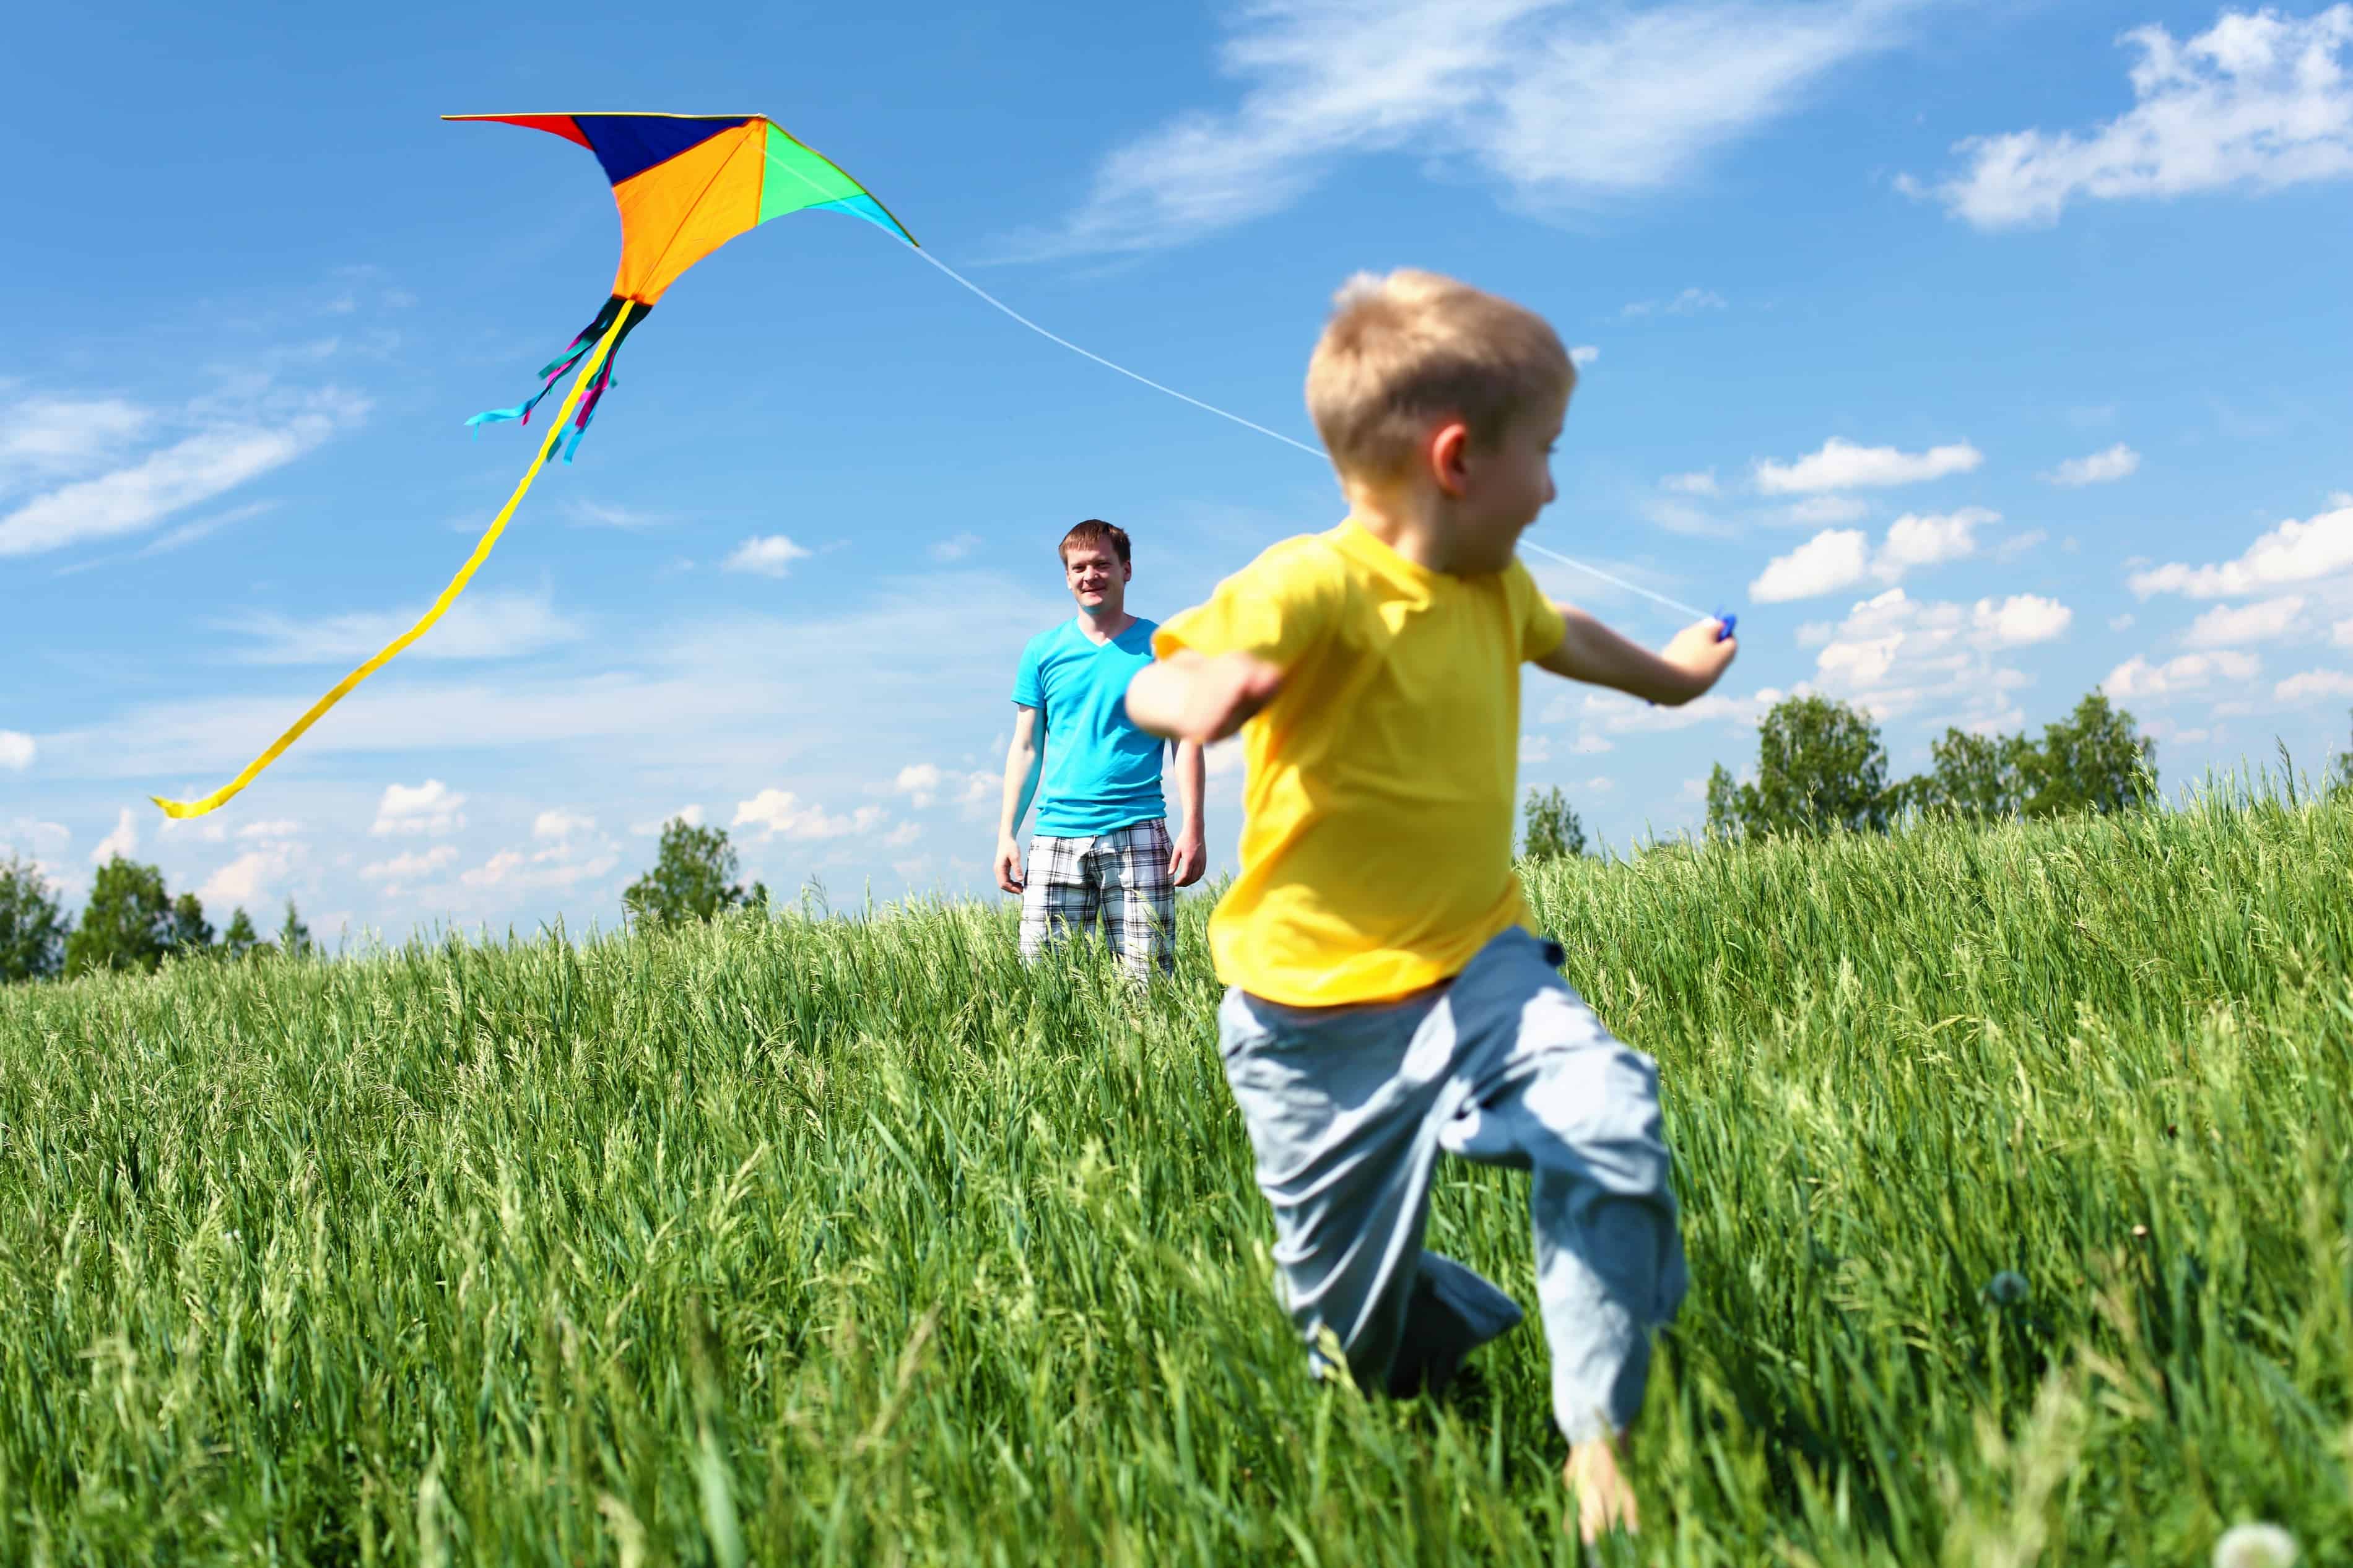 11 Free Summer Activities To Keep Your Kids Occupied3800 x 2533